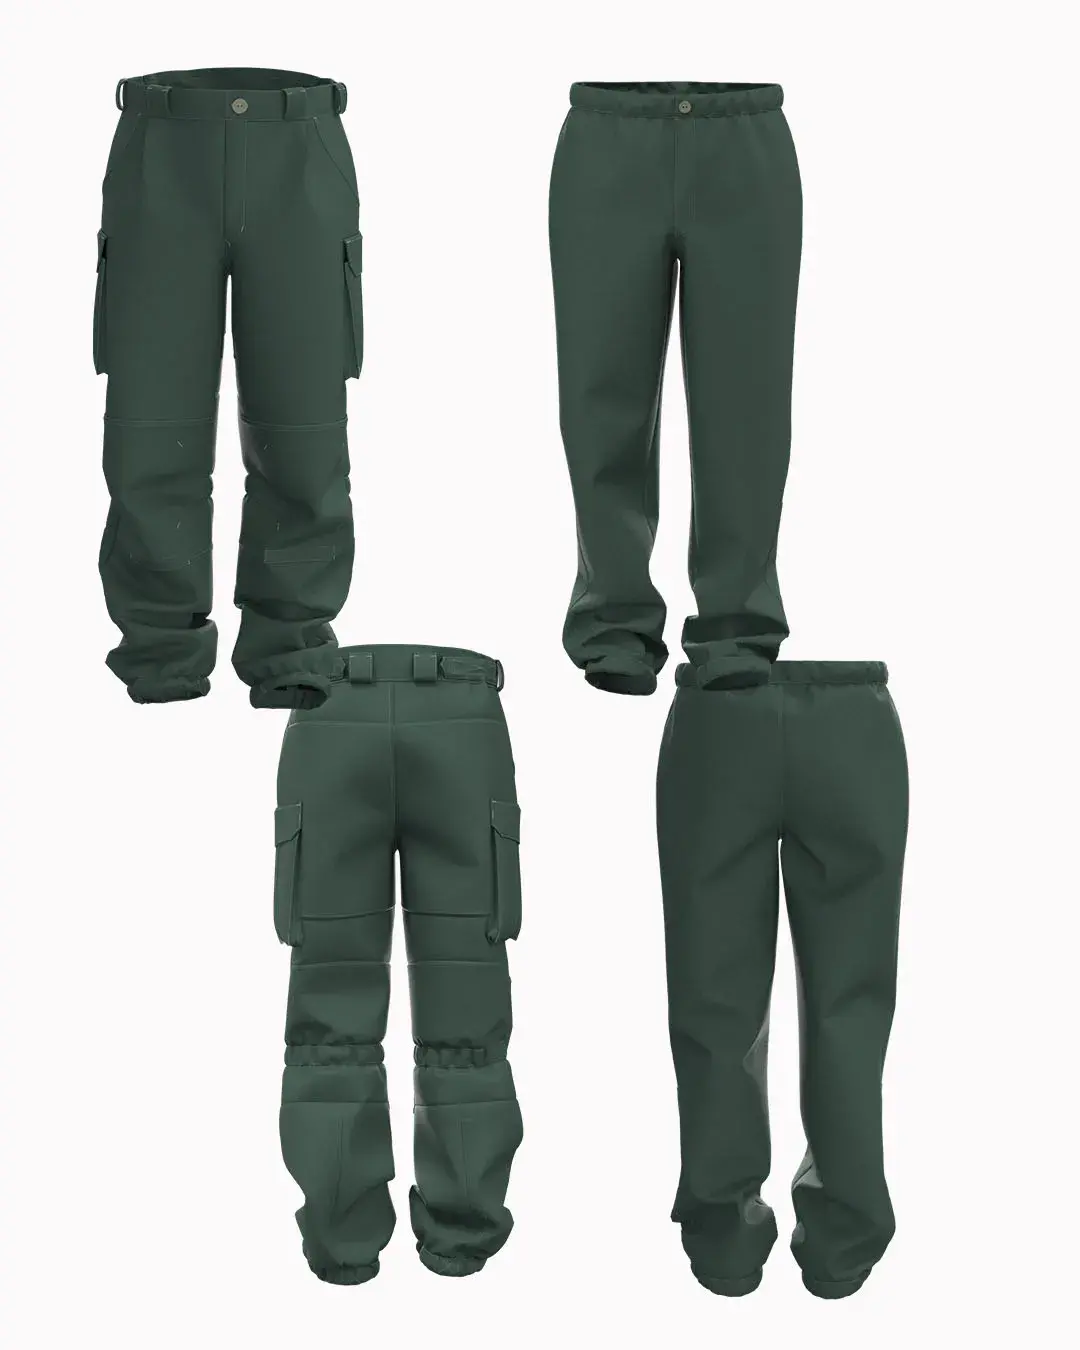 Winter army trousers with insulation